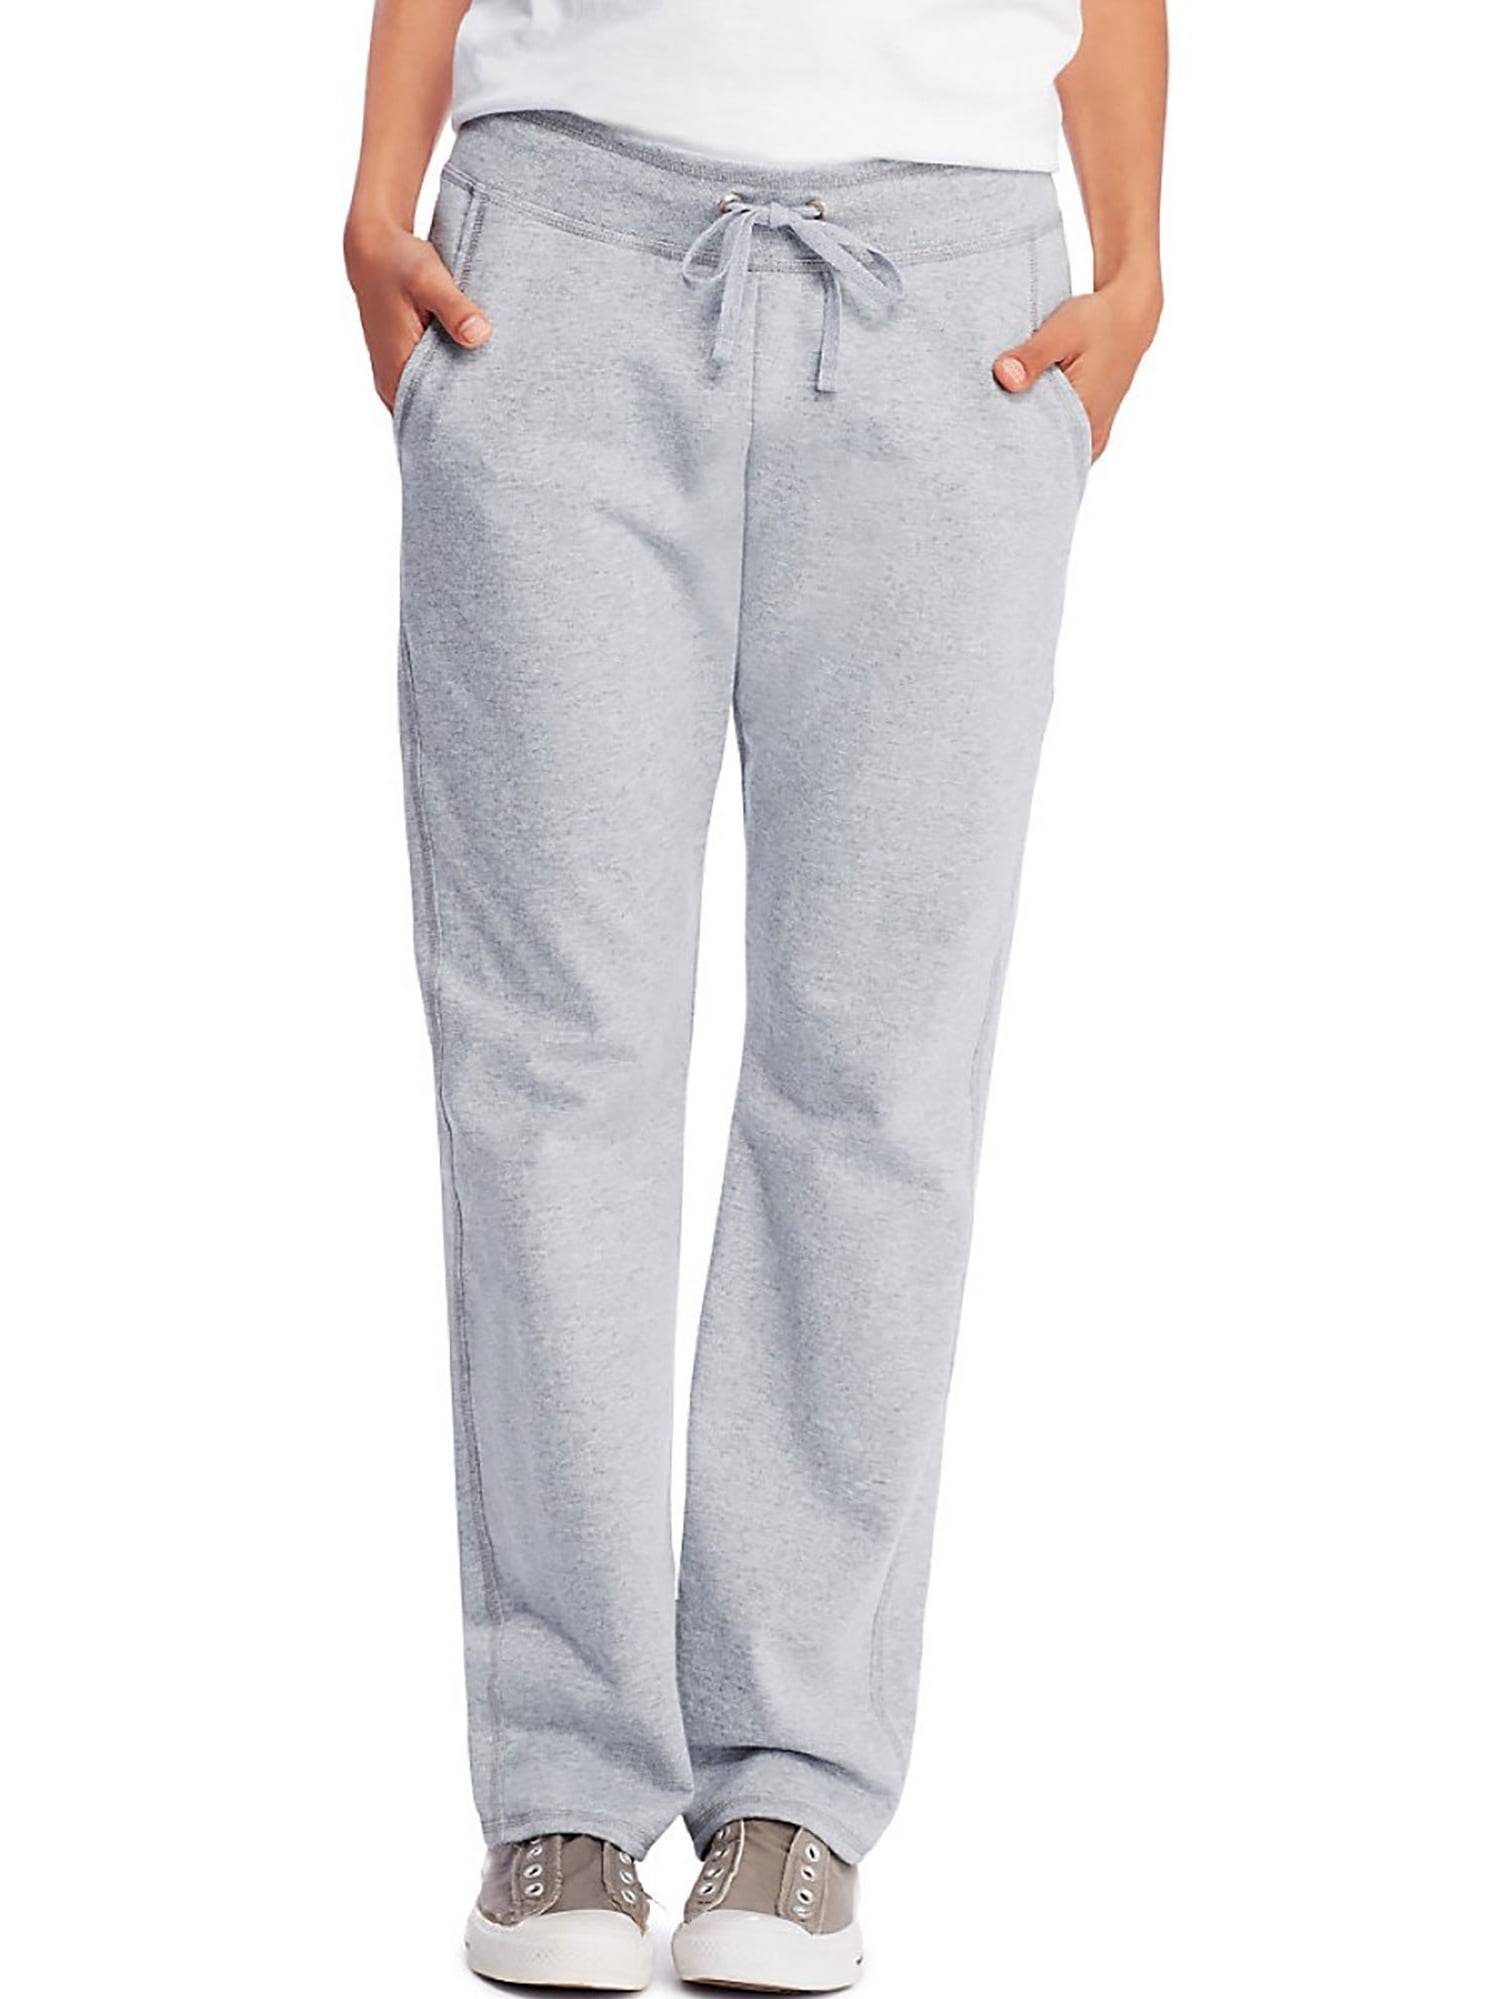 Hanes - Hanes Women's French Terry Pocket Pant, Style O4677 - Walmart ...